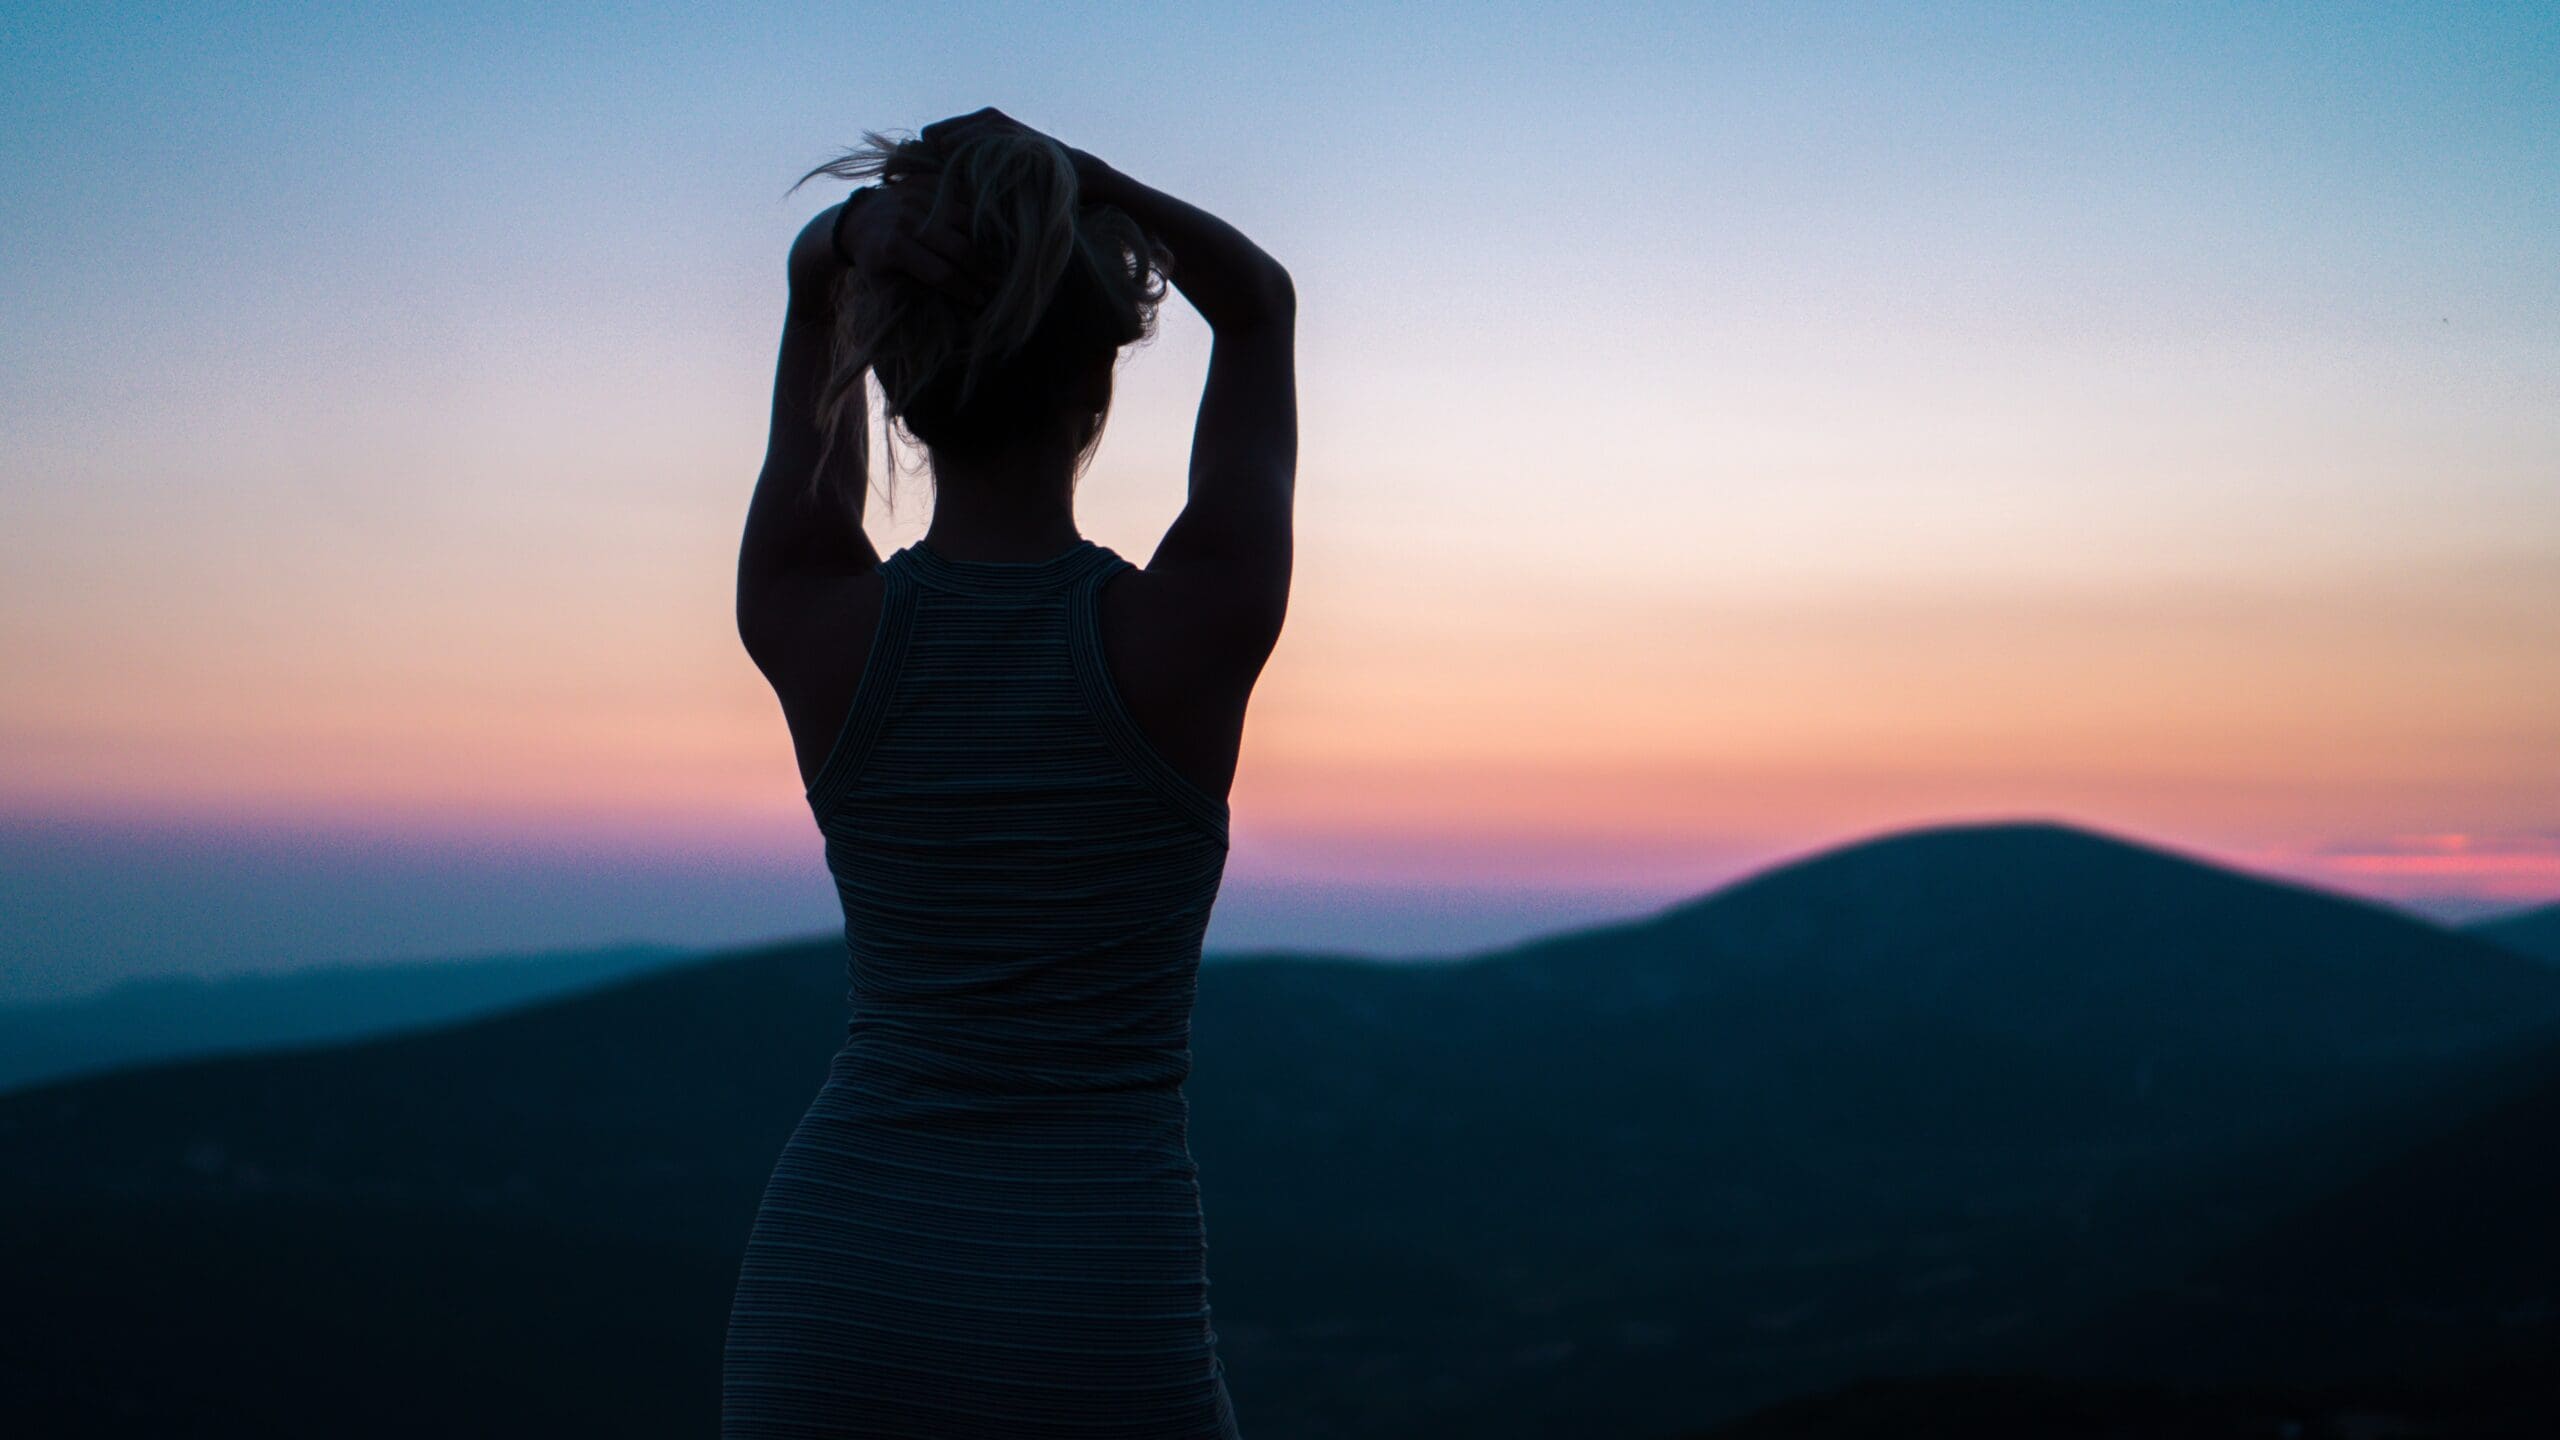 Female silhouette with arms placed above head, looking at sunset view across the mountains.